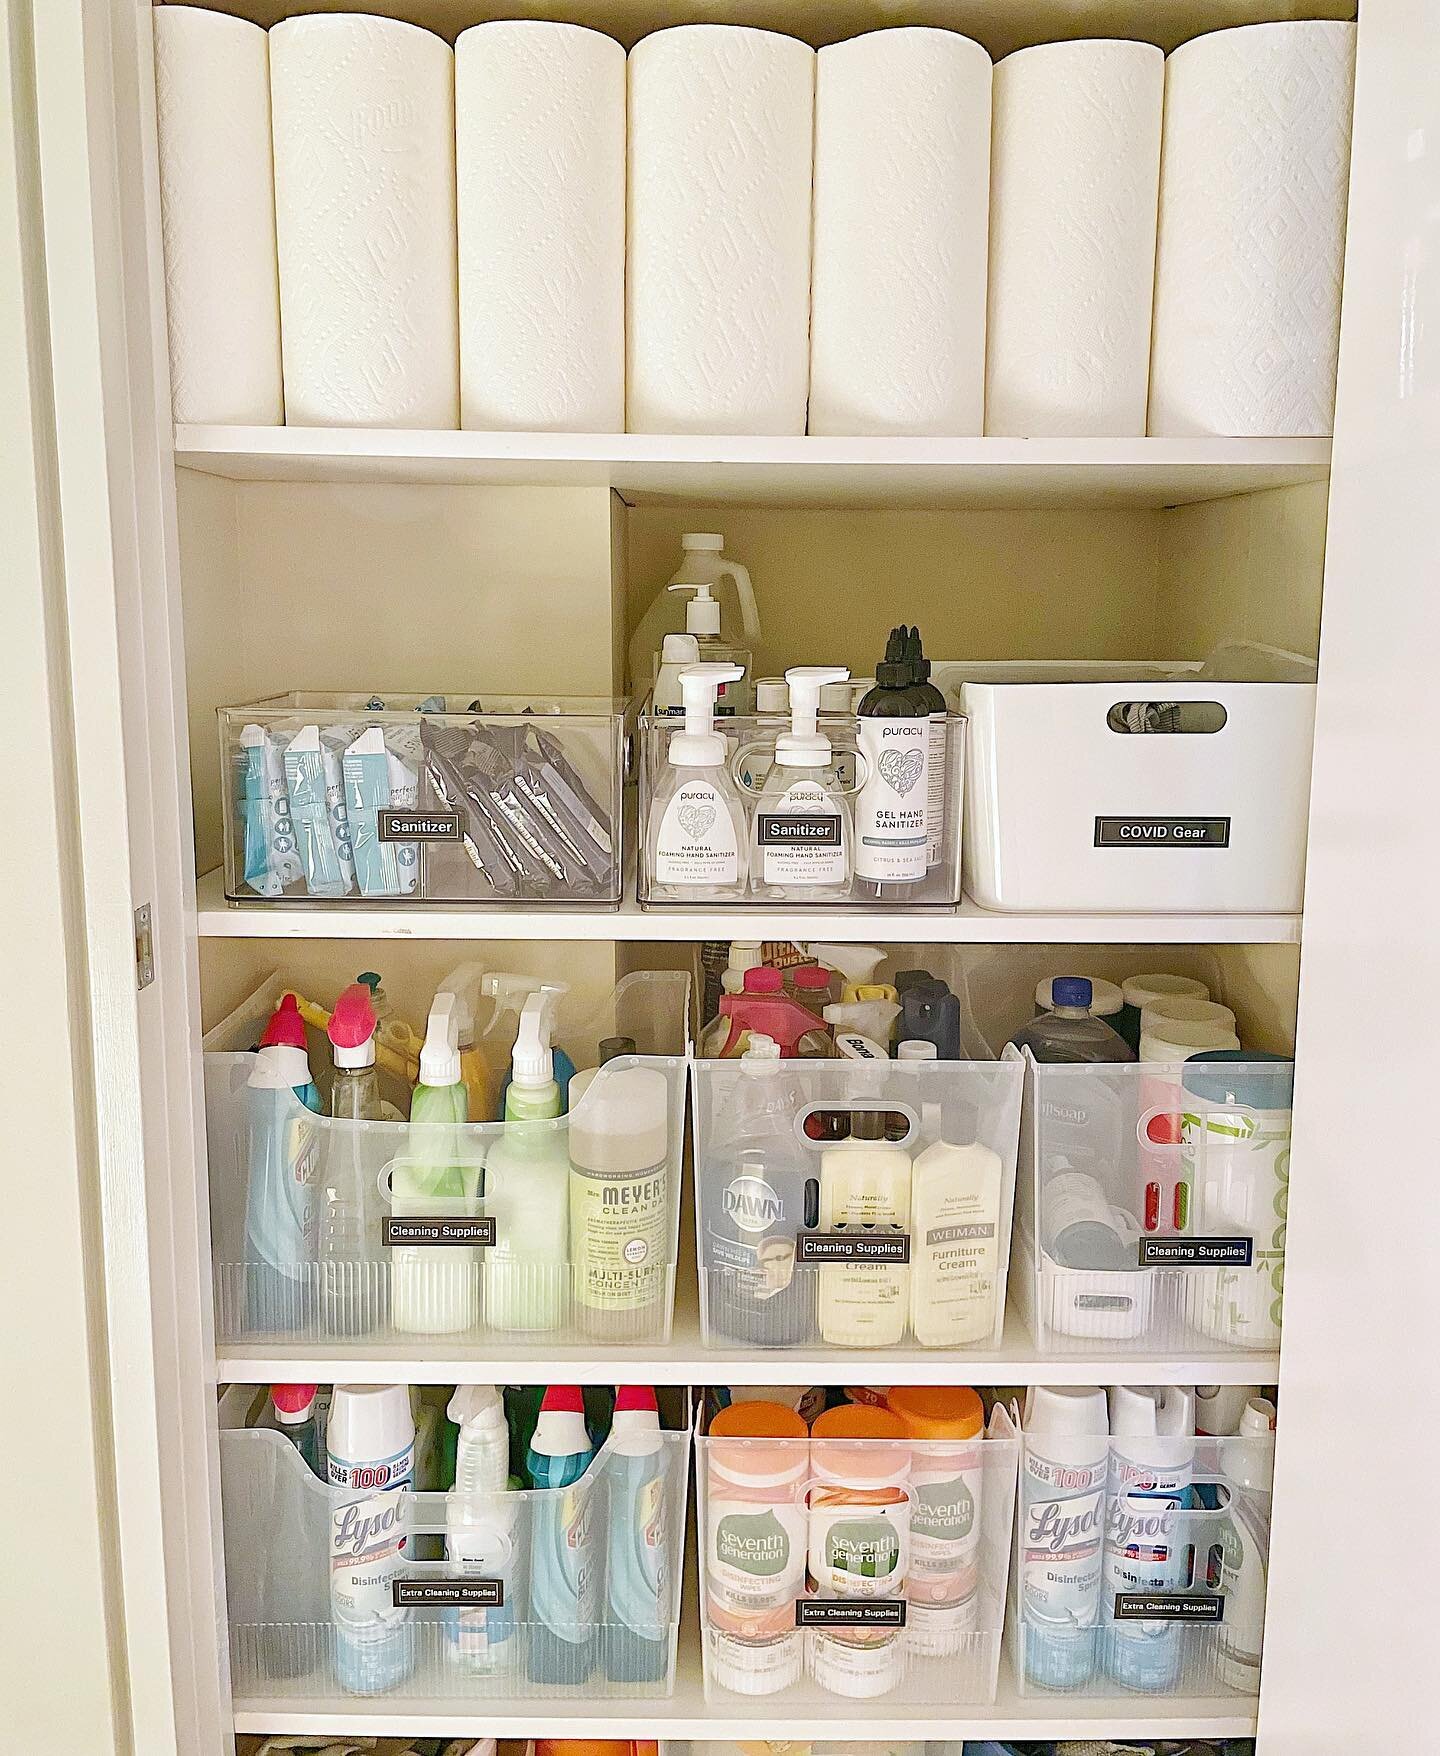 Two major elements to consider when organizing your home...

✨EVOLUTION. Systems *evolve* based on your needs. In this home we had to make more space for cleaning supplies, paper towels and COVID gear. Right now we are all probably holding onto more 